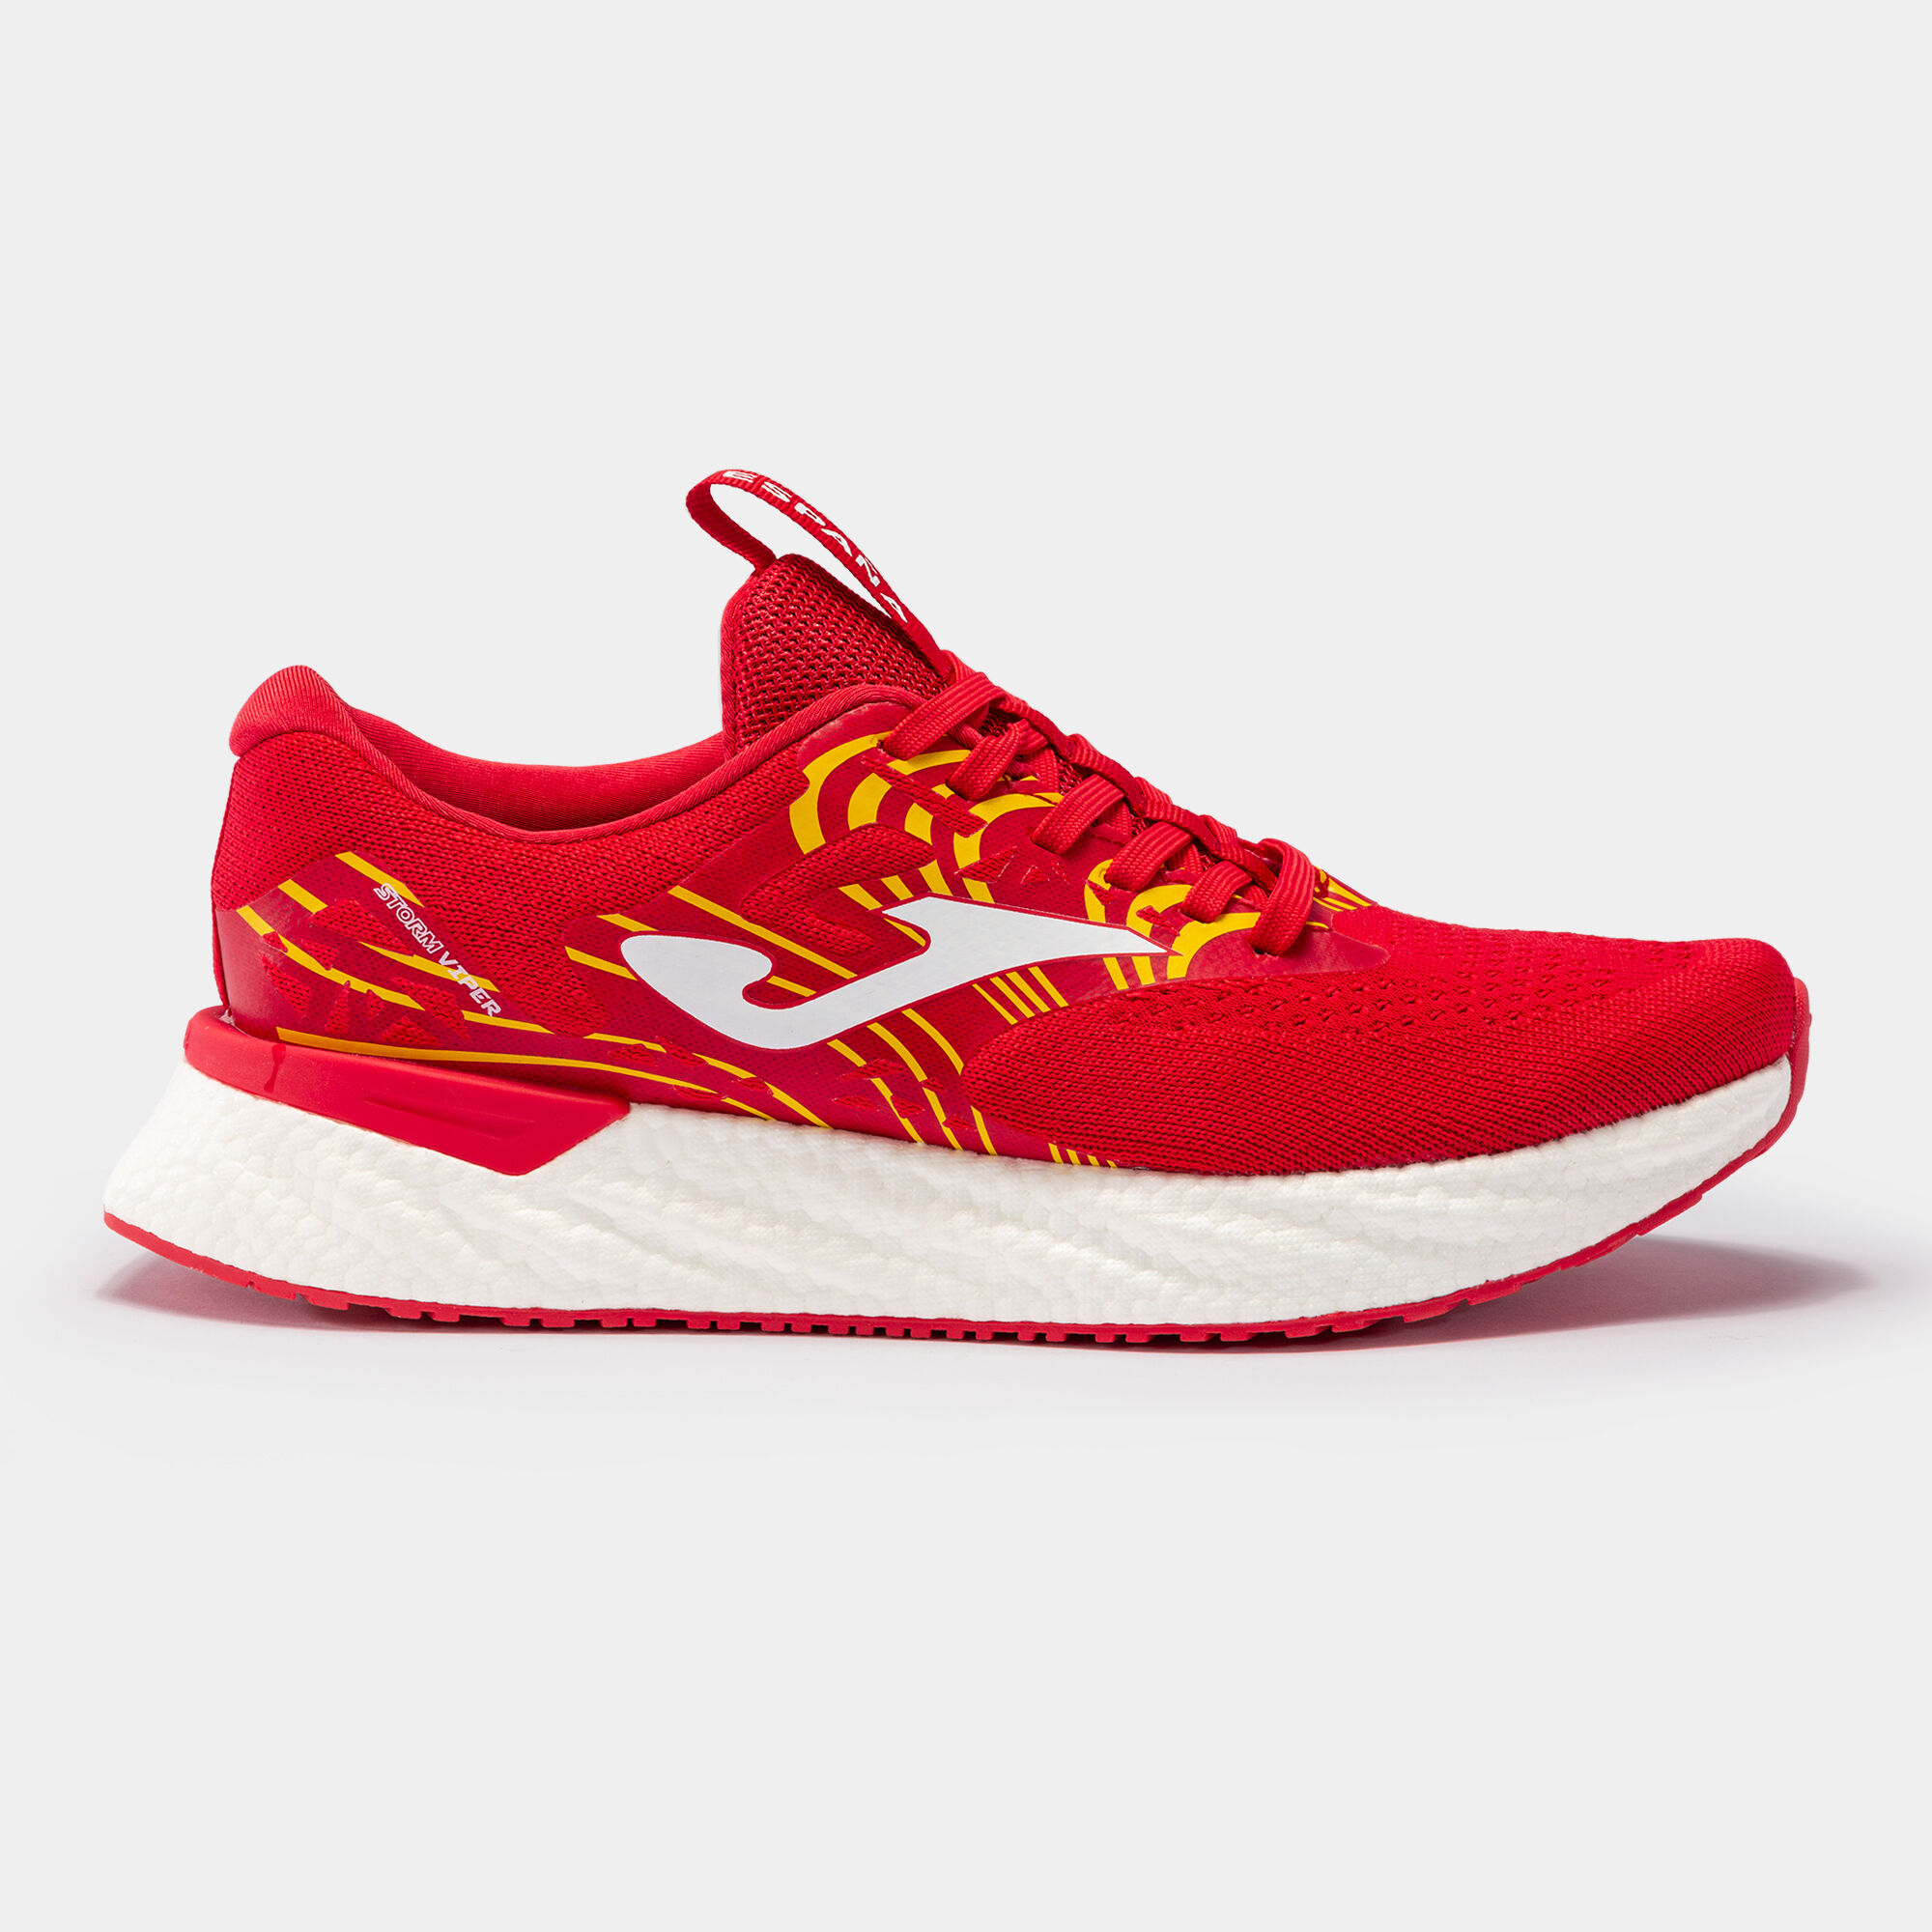 CHAUSSURES RUNNING VIPER 22 ESPAGNE HOMME ROUGE